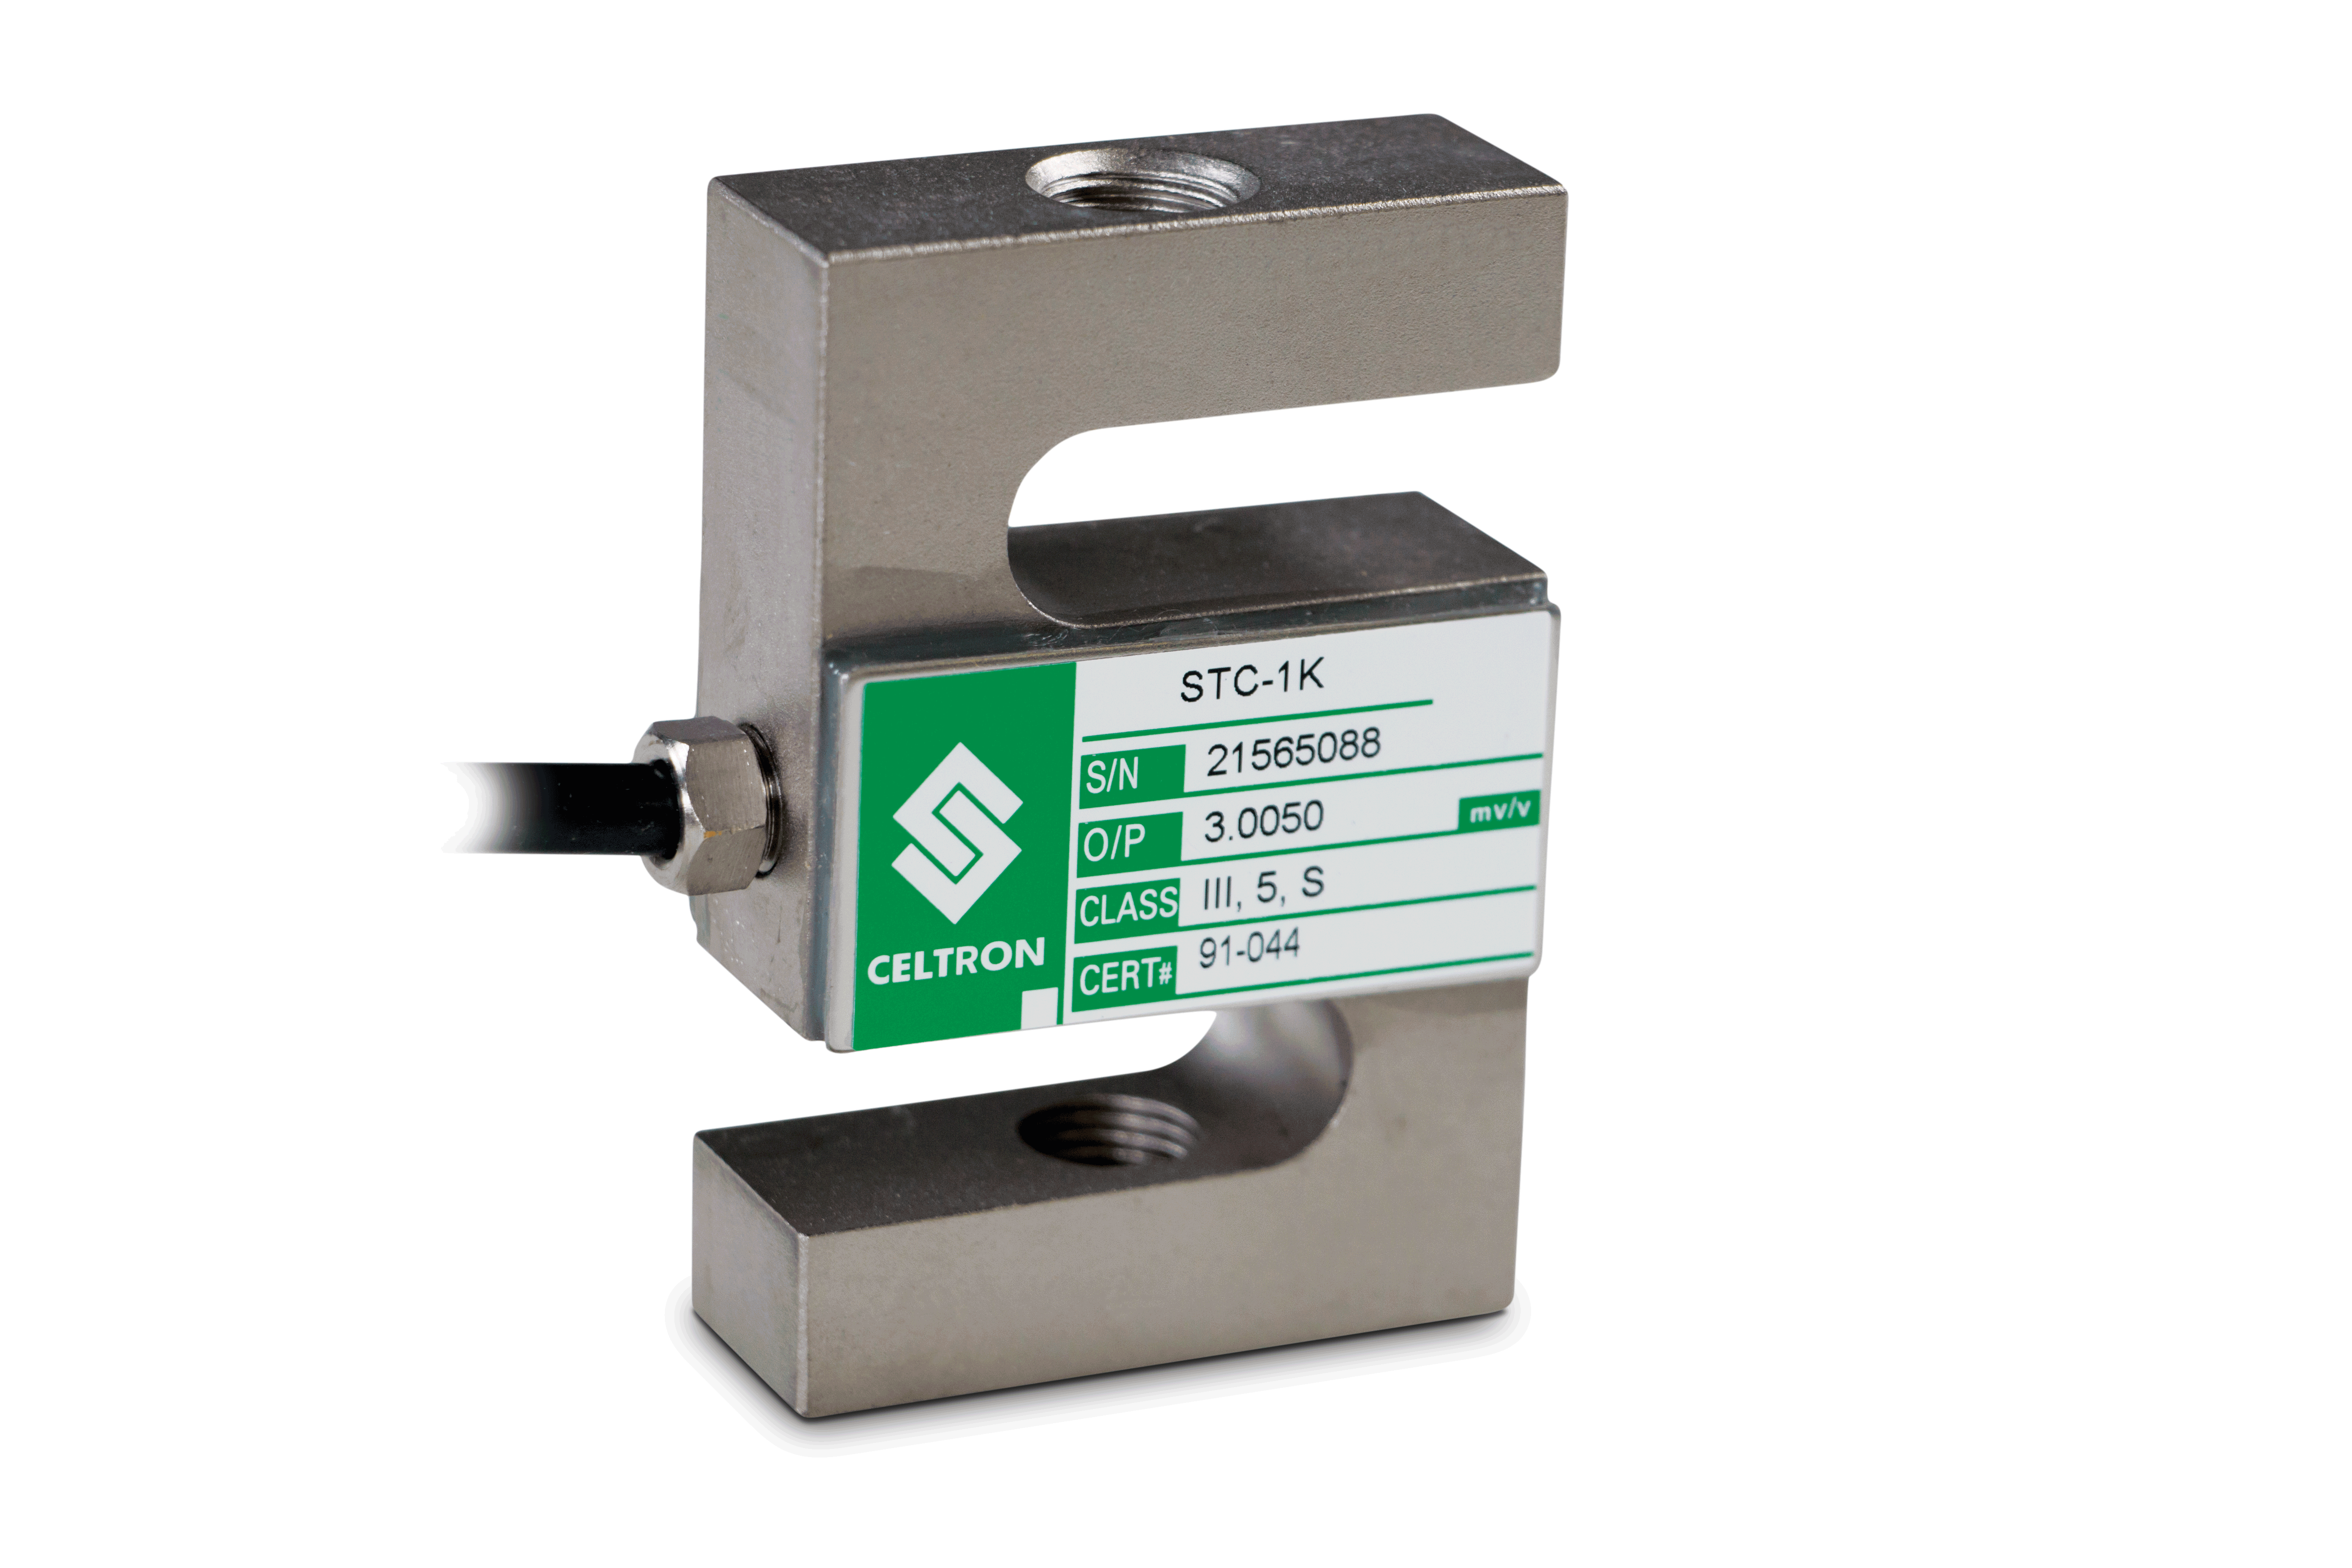 Rice Lake Scale parts, Treaded load cell, certified load cell, Celtron scale